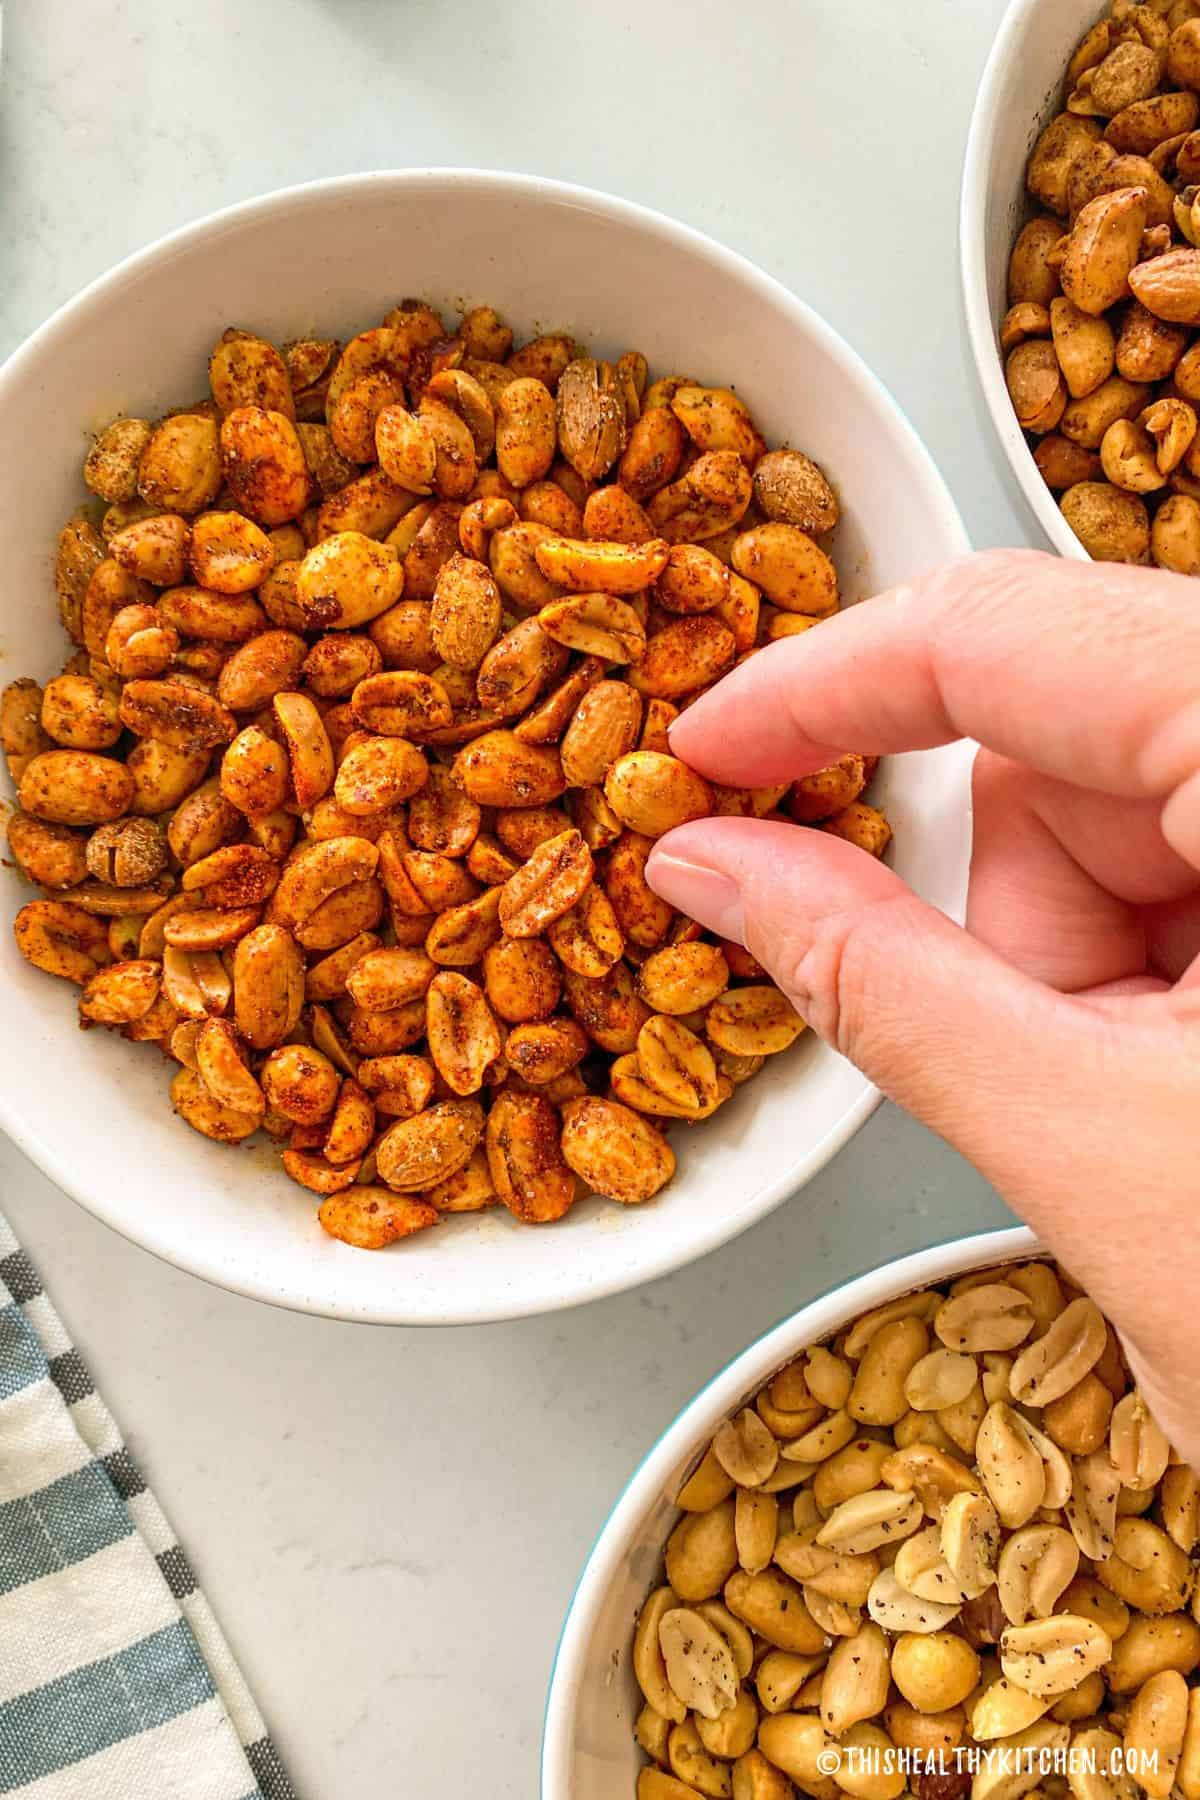 Hand reaching for roasted peanut in bowl of peanuts.